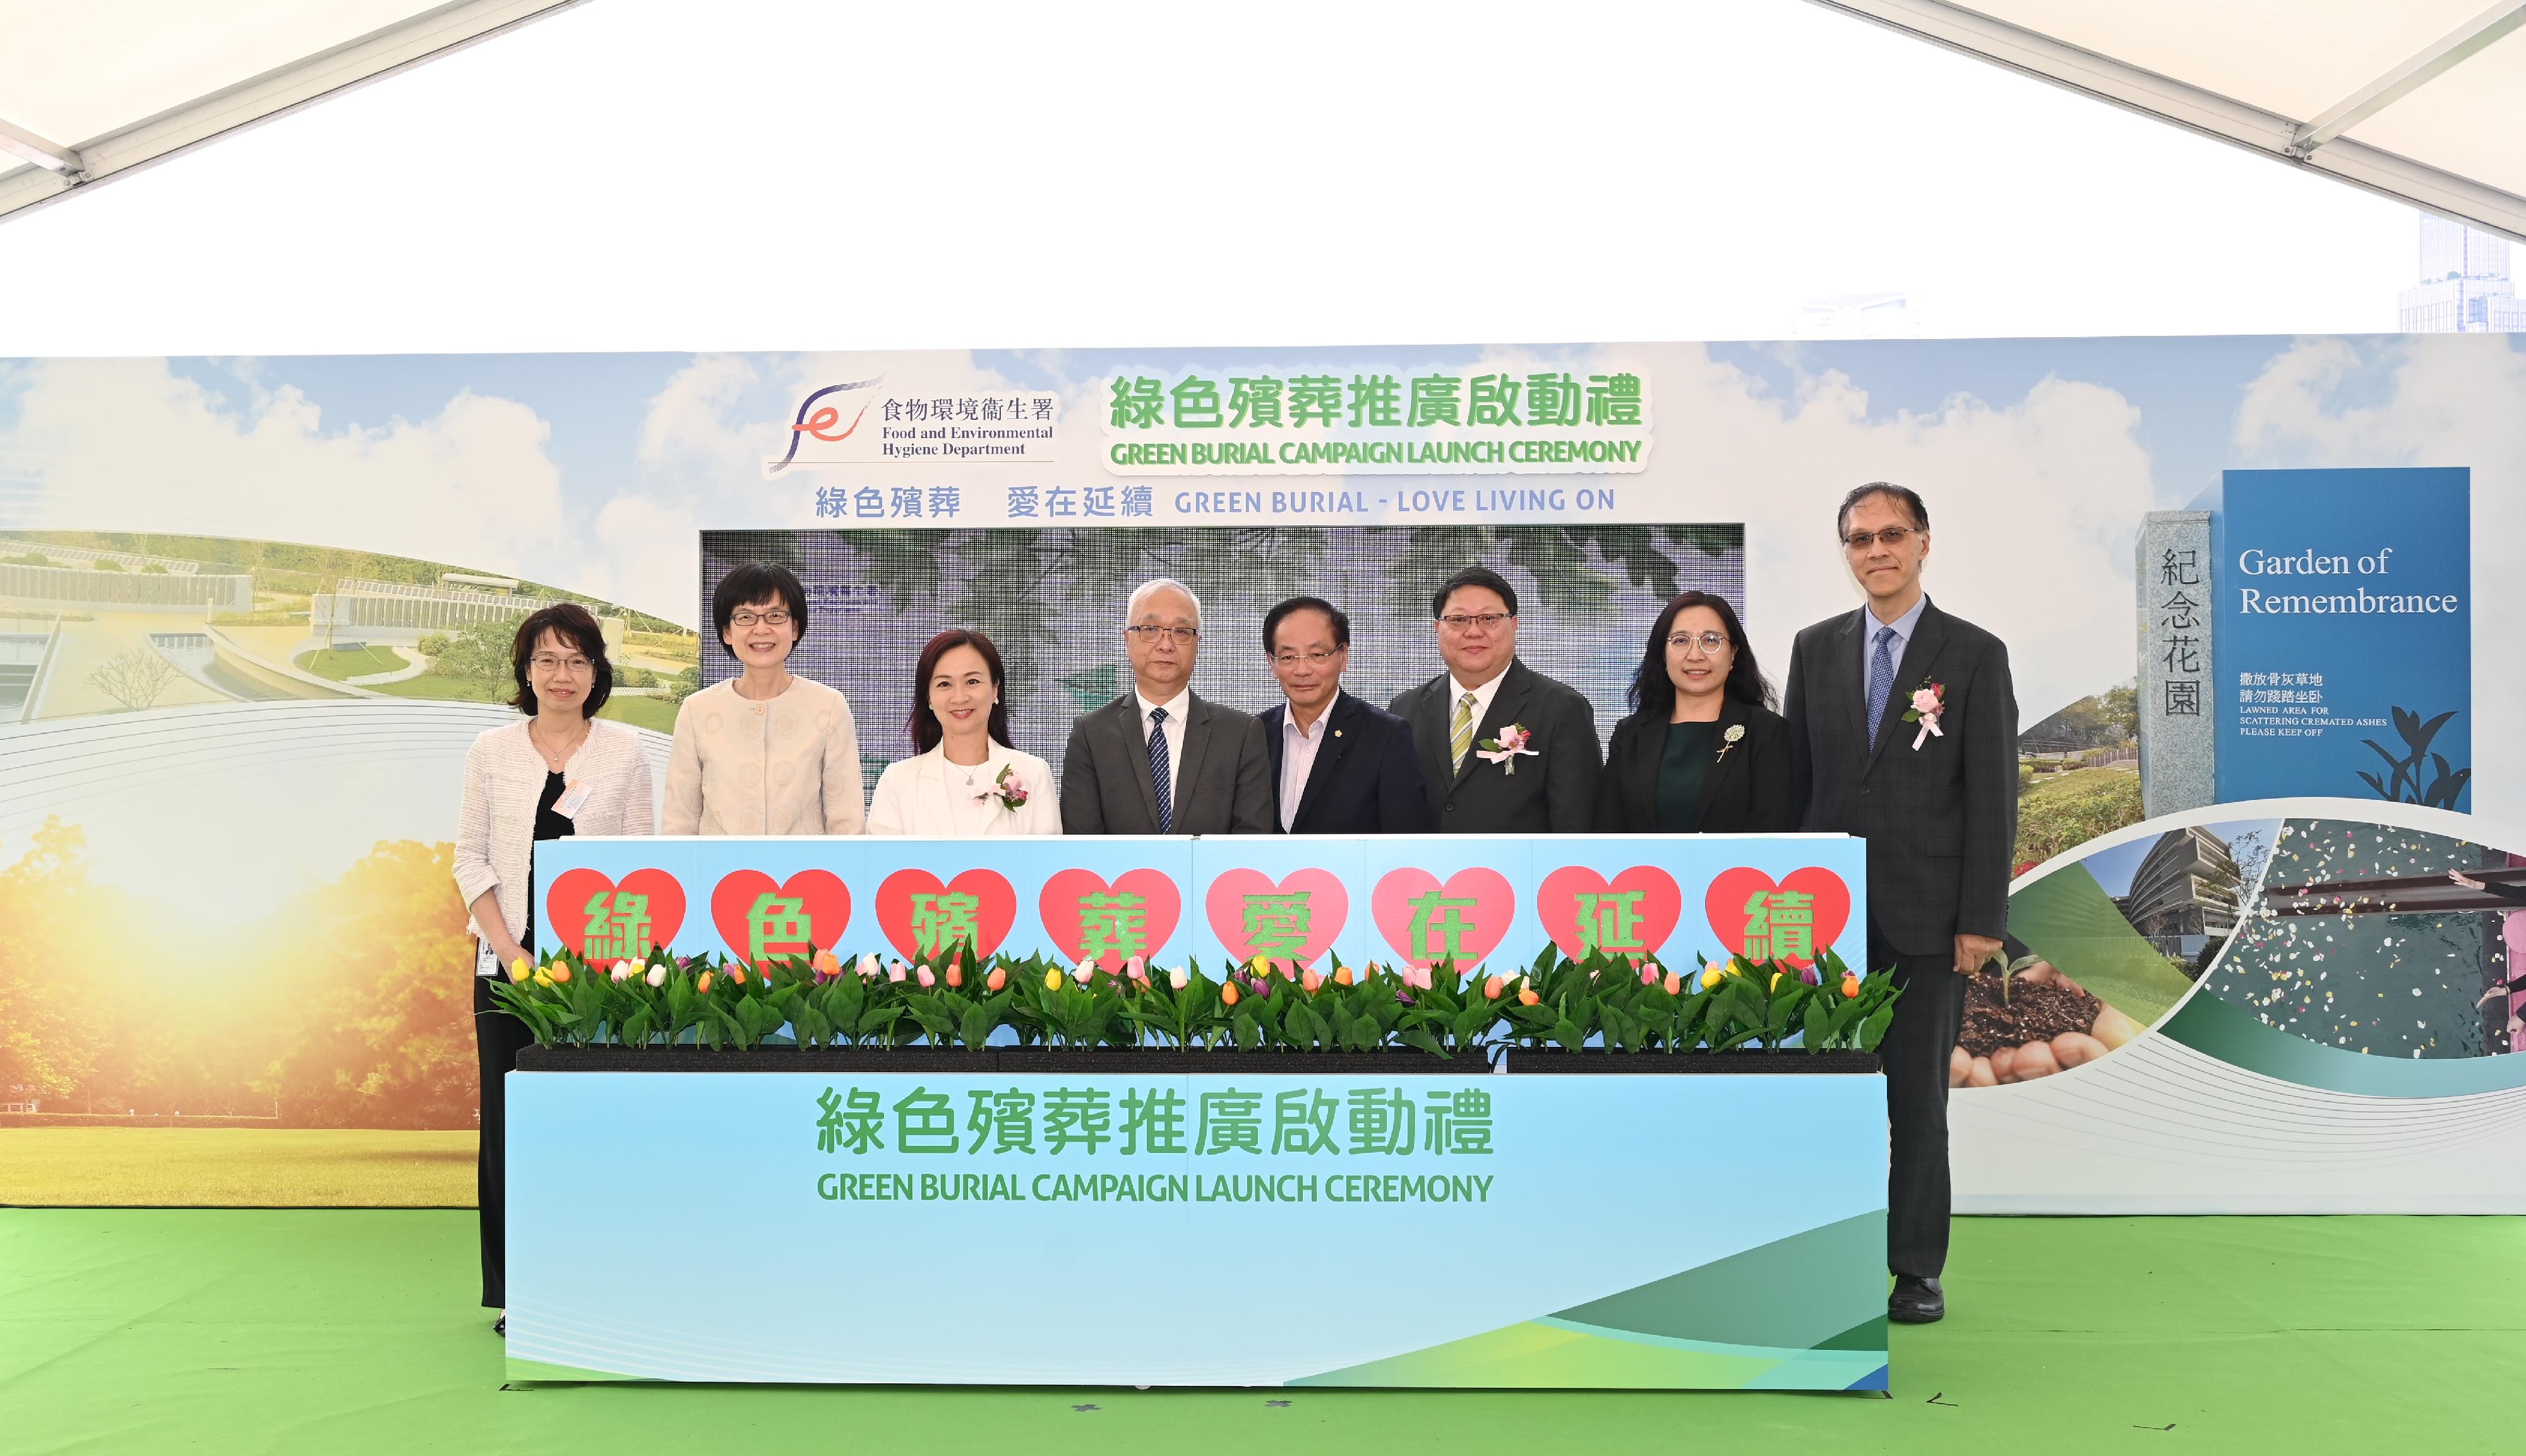 The Secretary for Environment and Ecology, Mr Tse Chin-wan, officiates at the Green Burial Campaign Launch Ceremony today (October 17). Photo shows (from left) the Deputy Secretary for Environment and Ecology (Food), Ms Ivy Law; the Permanent Secretary for Environment and Ecology (Food), Miss Vivian Lau; the Chairman of the Panel on Food Safety and Environmental Hygiene of the Legislative Council, Ms Joephy Chan; Mr Tse; the Deputy Chairperson of the Private Columbaria Licensing Board, Mr‍ Ip‍ Kwok-‍him; the Chairman of the Advisory Council on Food and Environmental Hygiene, Professor Kenneth Leung; the Director of Food and Environmental Hygiene, Ms Irene Young; and the Director of Architectural Services, Mr Edward Tse, officiating at the ceremony.